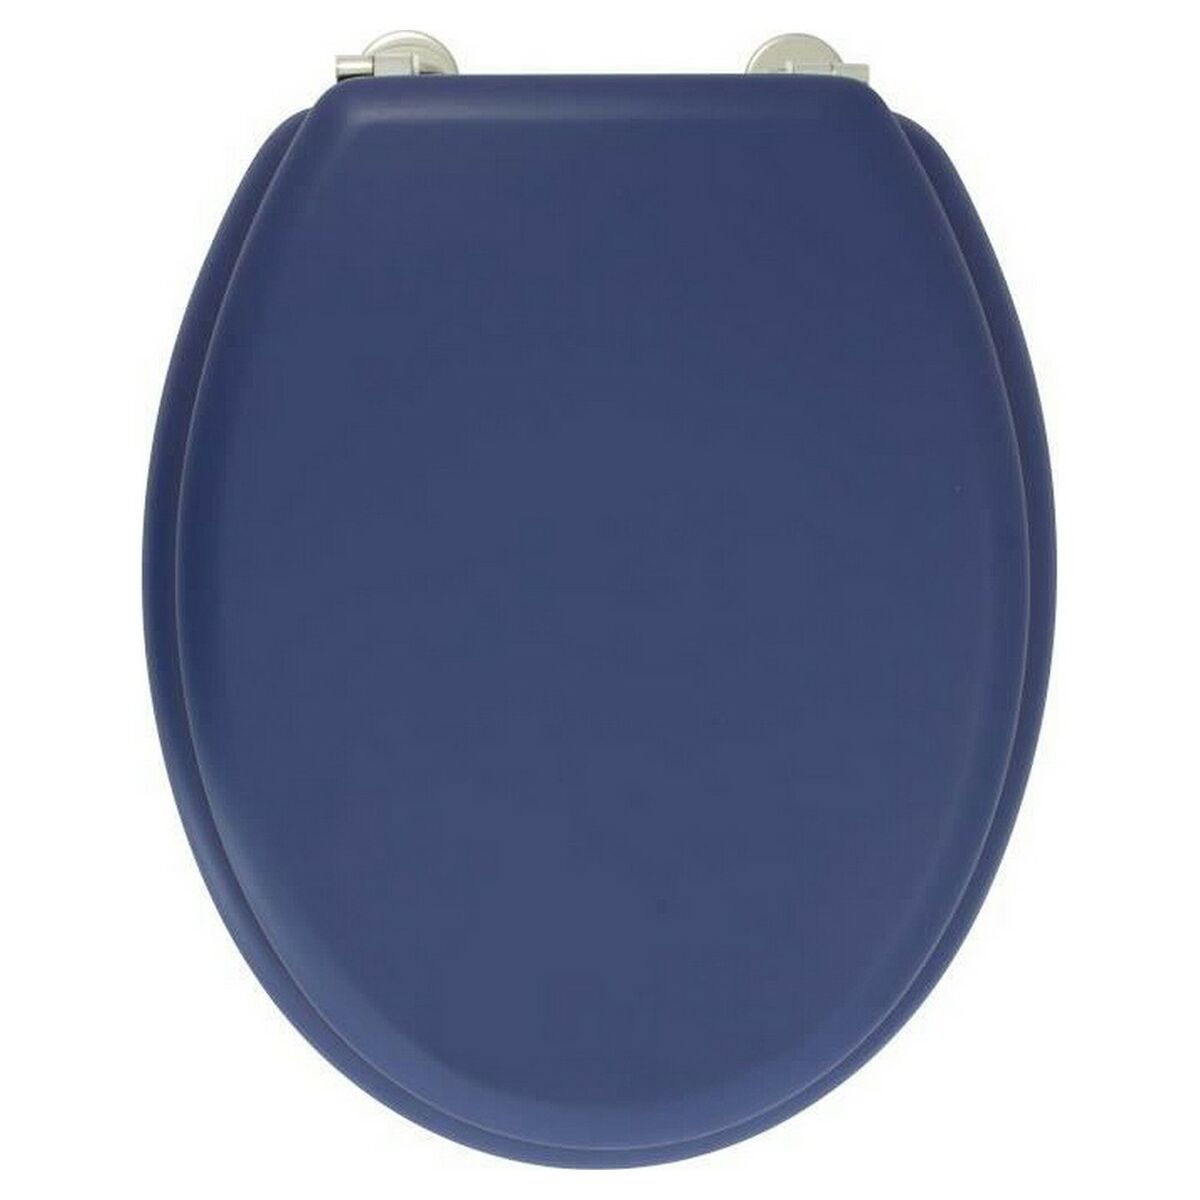 Toilet seat Gelco Dolce Navy blue Wood MDF